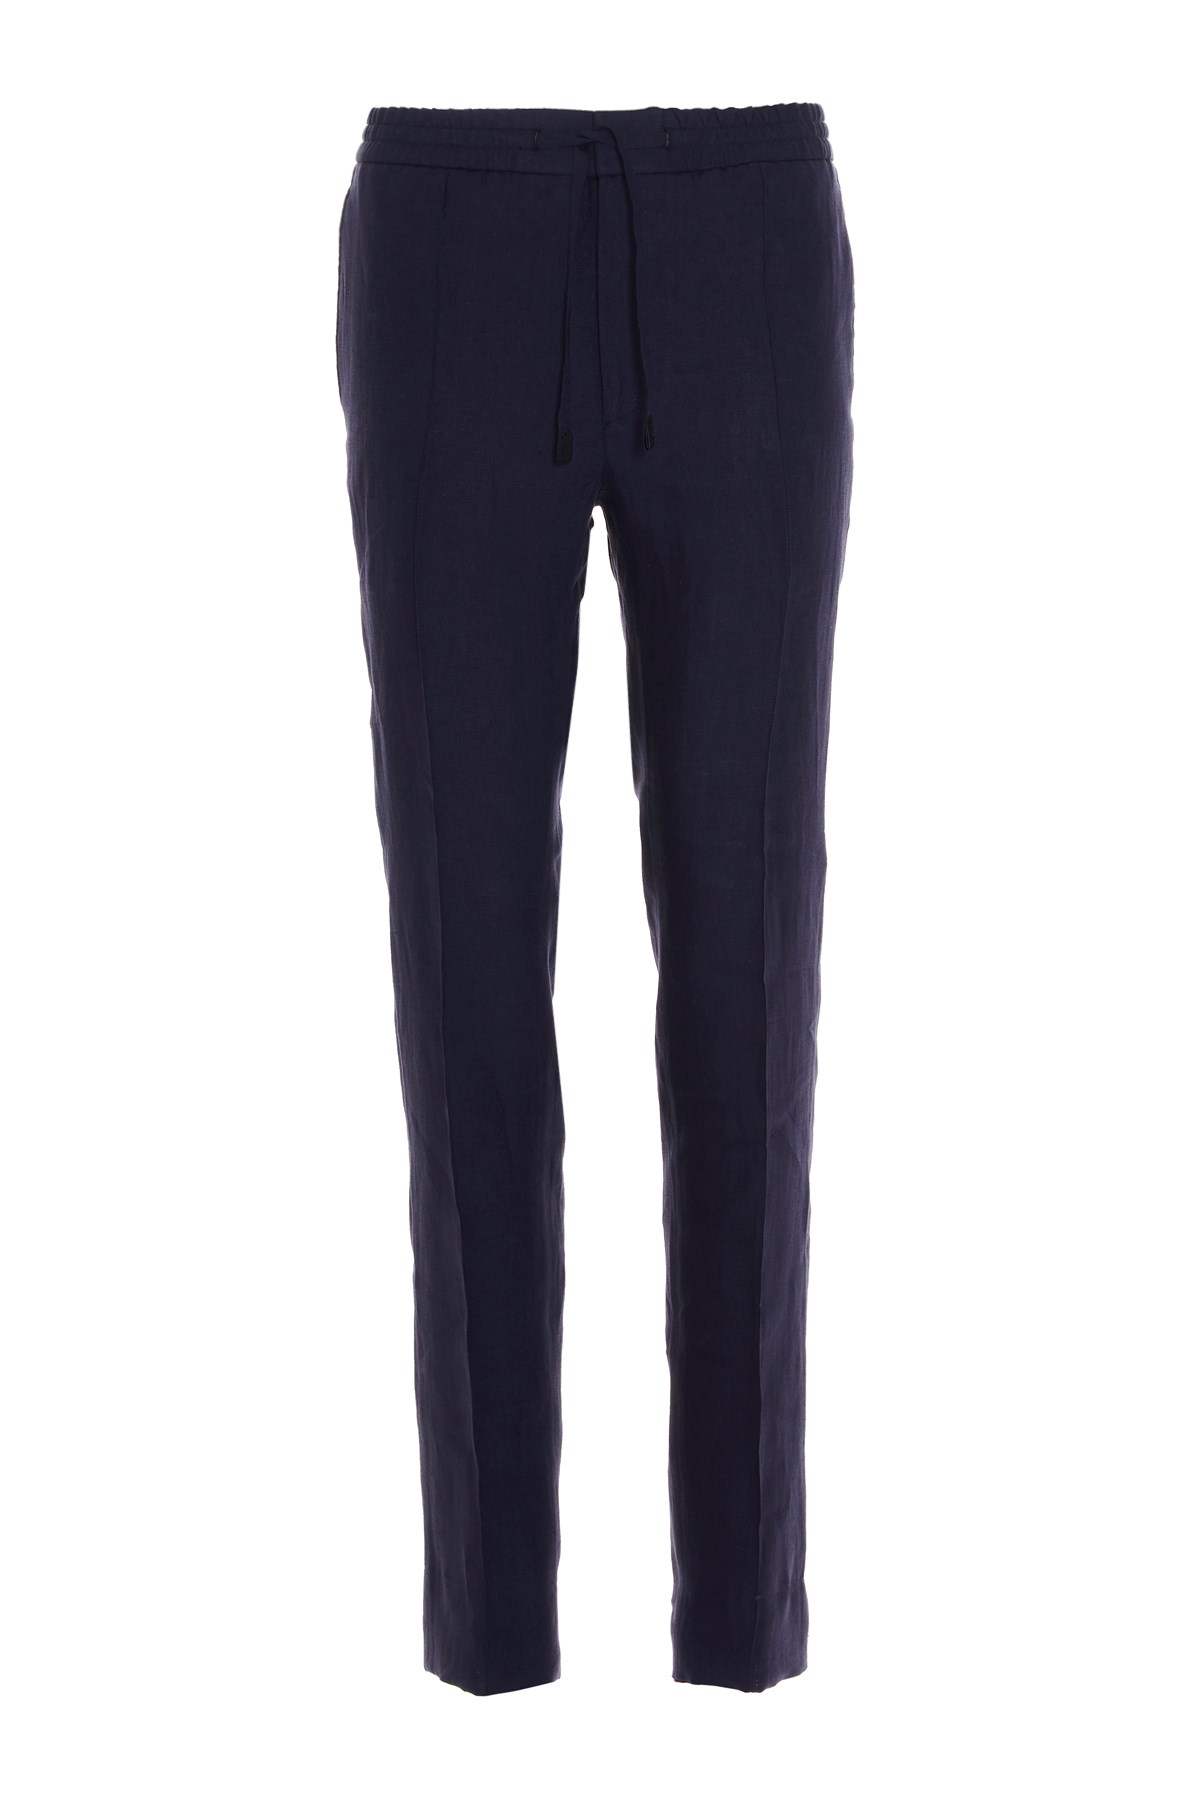 BRIONI 'New Sidney' Trousers